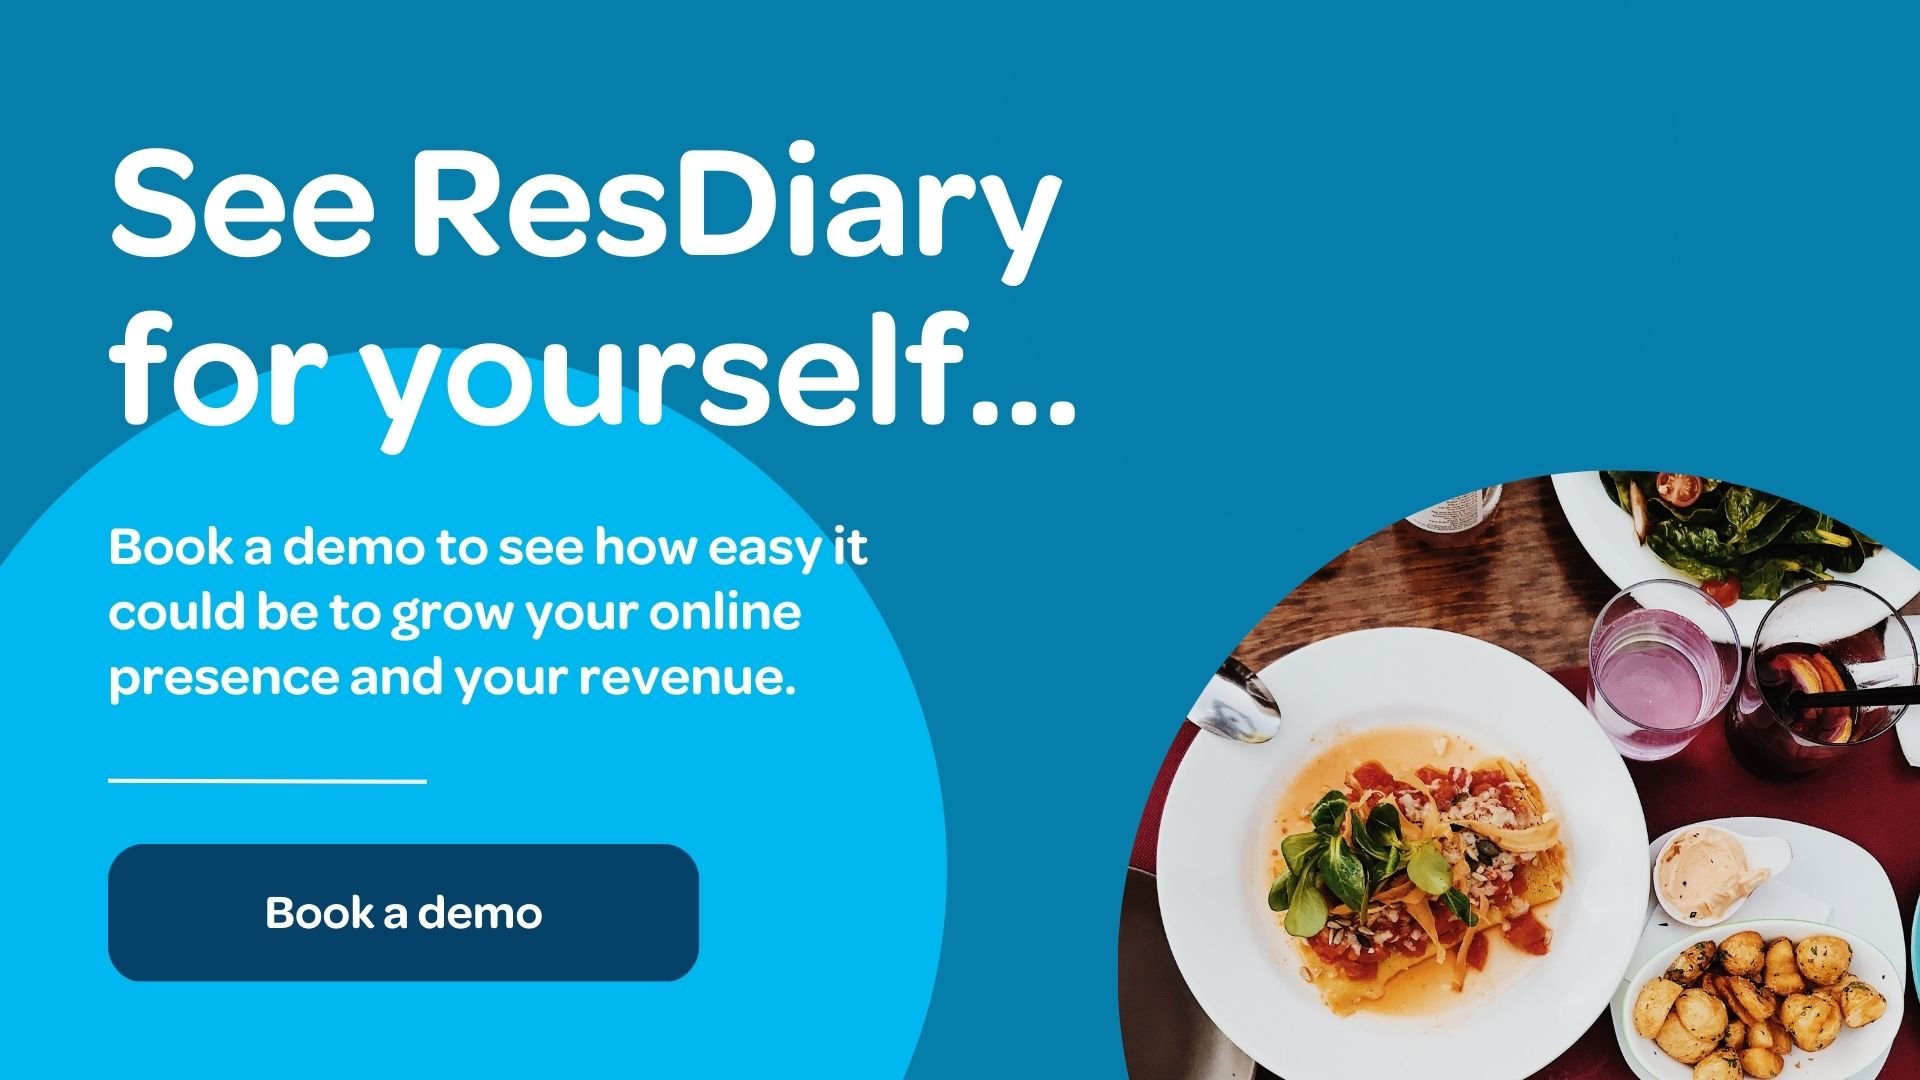 Call to action to book a demo with ResDiary